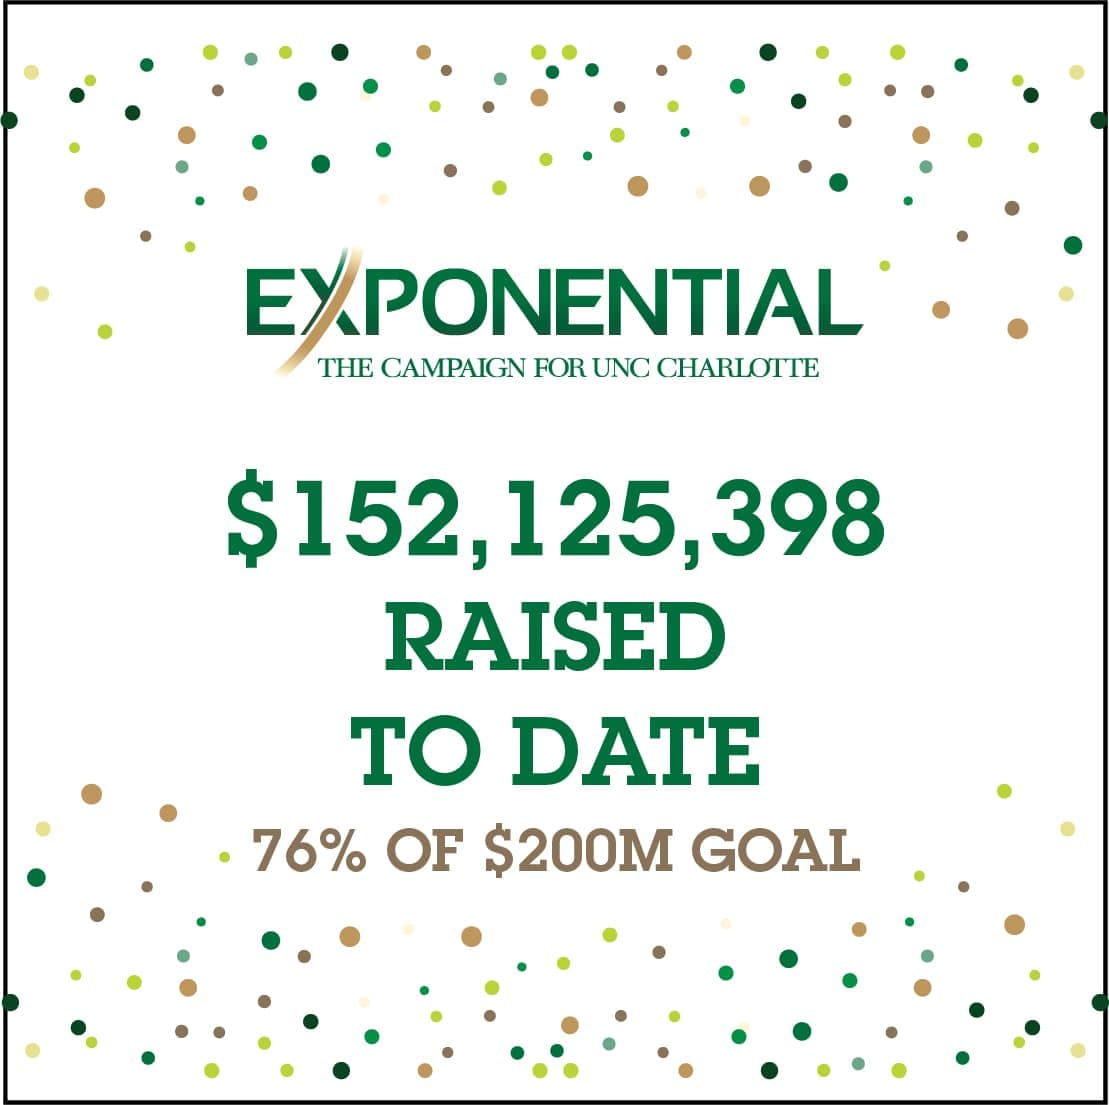 Exponential: $152,125,398 raised to date; 76% of $200M Goal